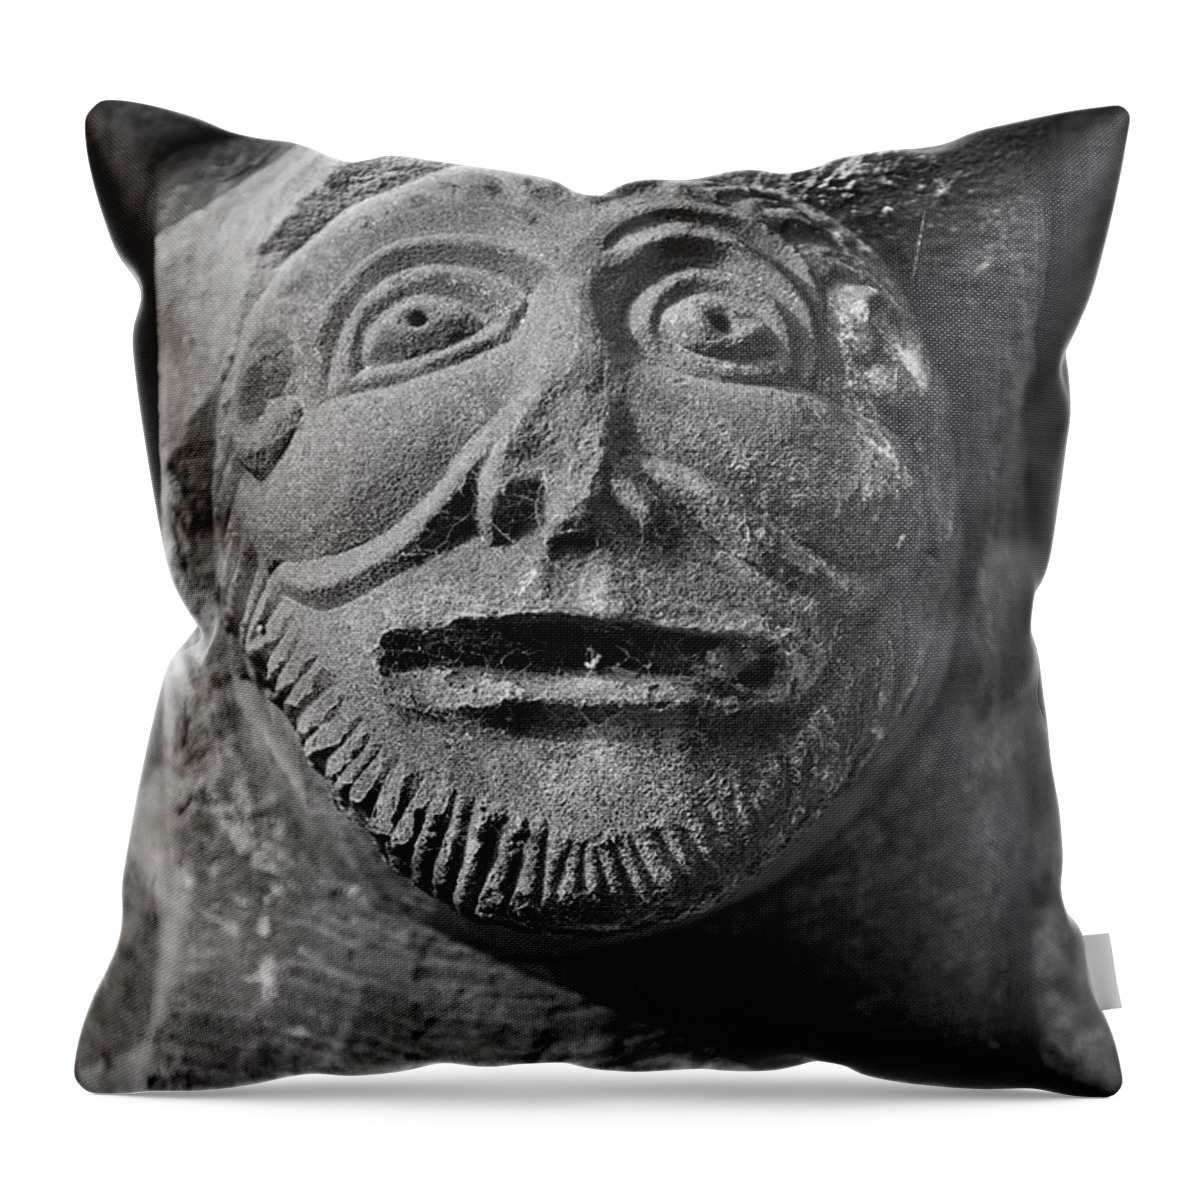 Romanesque Throw Pillow featuring the sculpture The Stone Bestiary - Photo of Norman Romanesque relief sculptures from Kilpec #1 by Paul E Williams